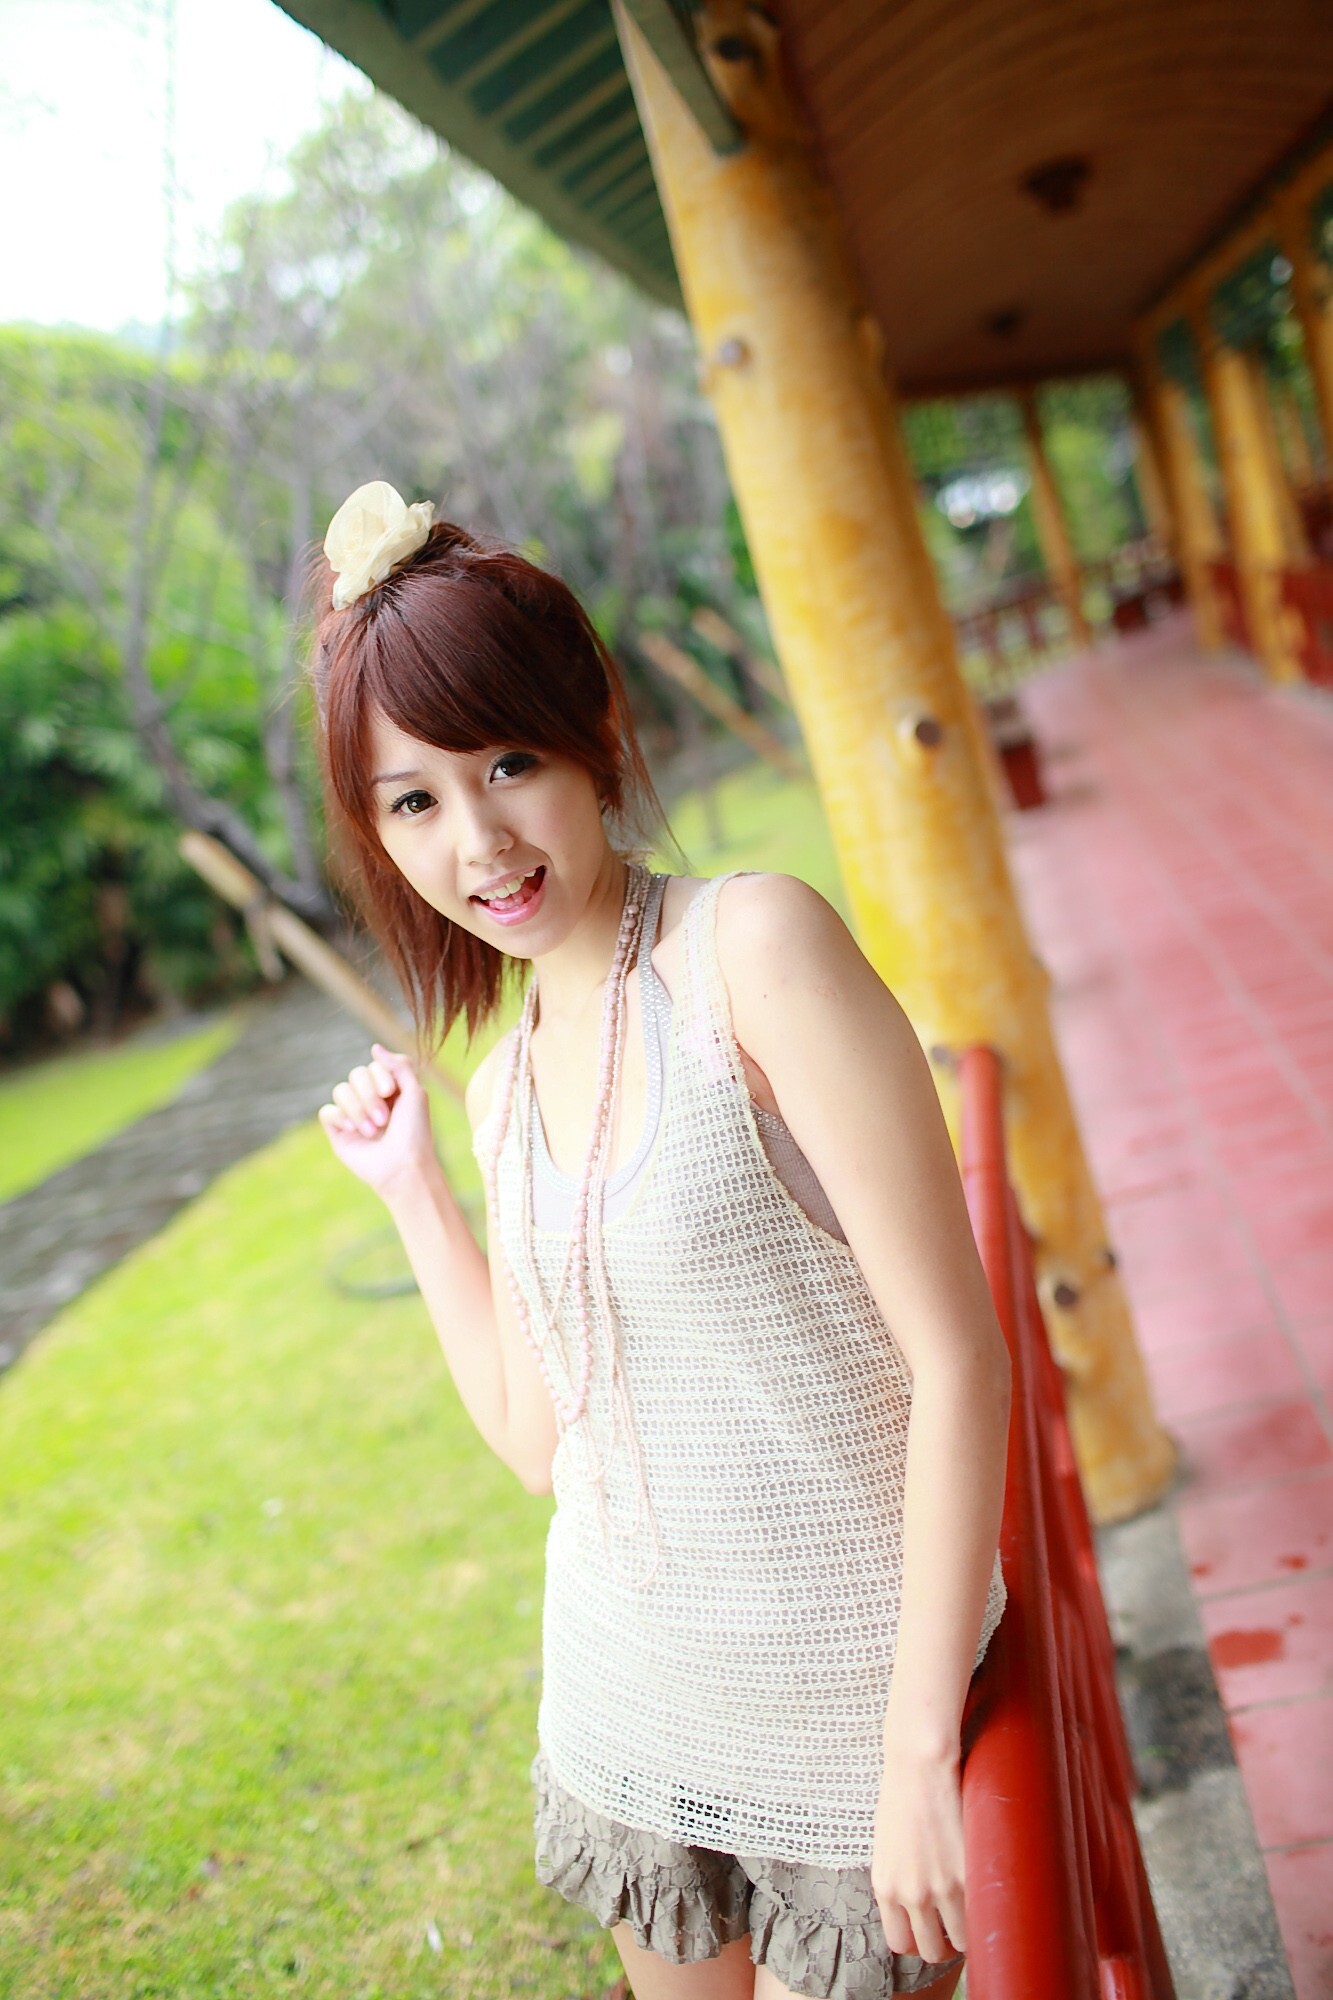 Madou series high definition beauty picture dream on October 30, 2010